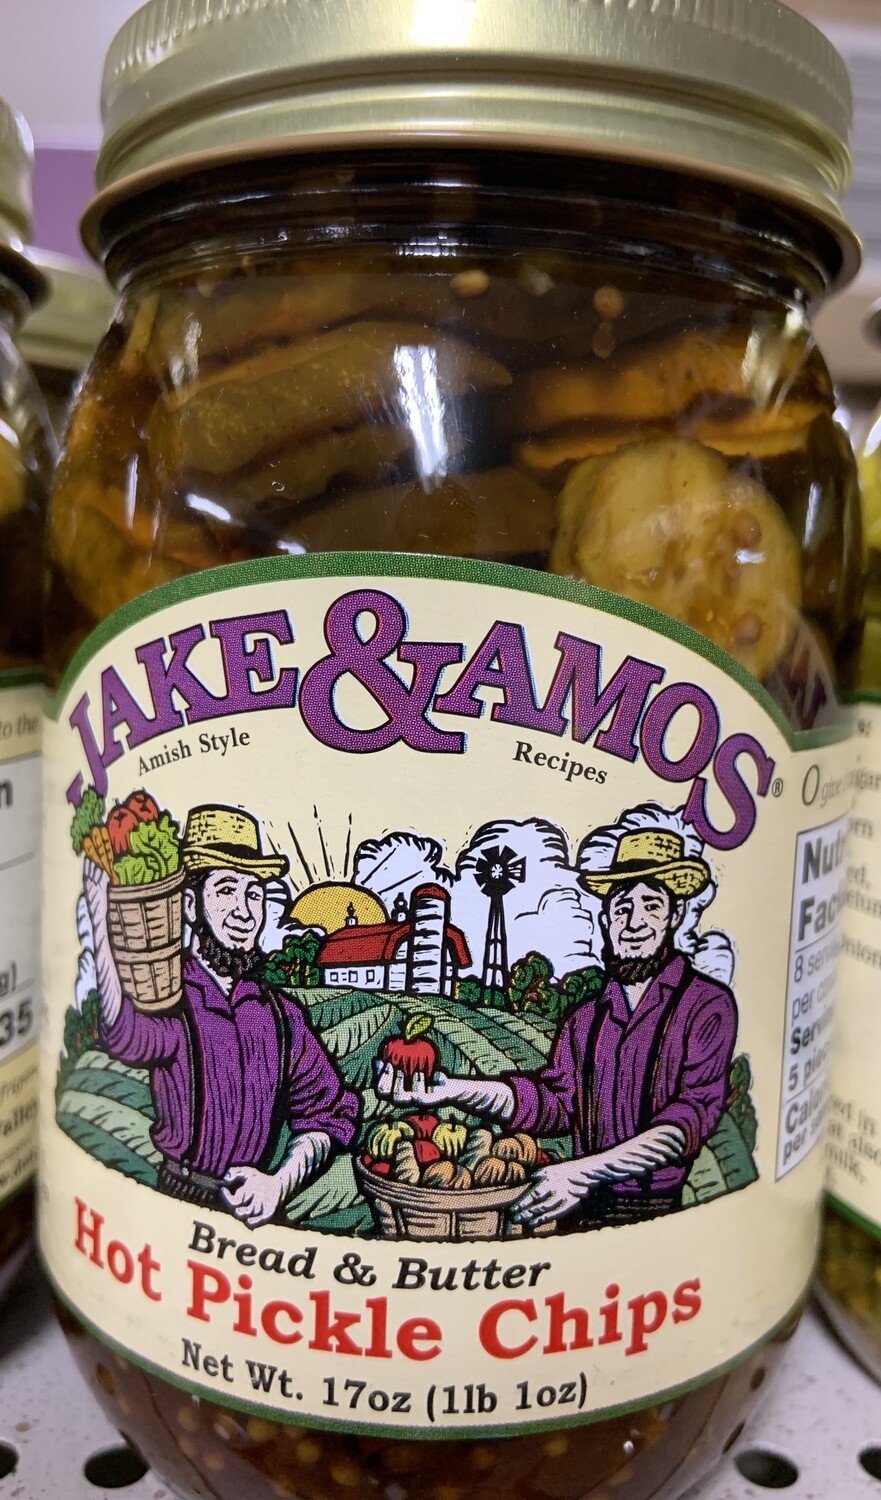 Jake & Amos Bread & Butter Hot Pickle Chips 16 oz